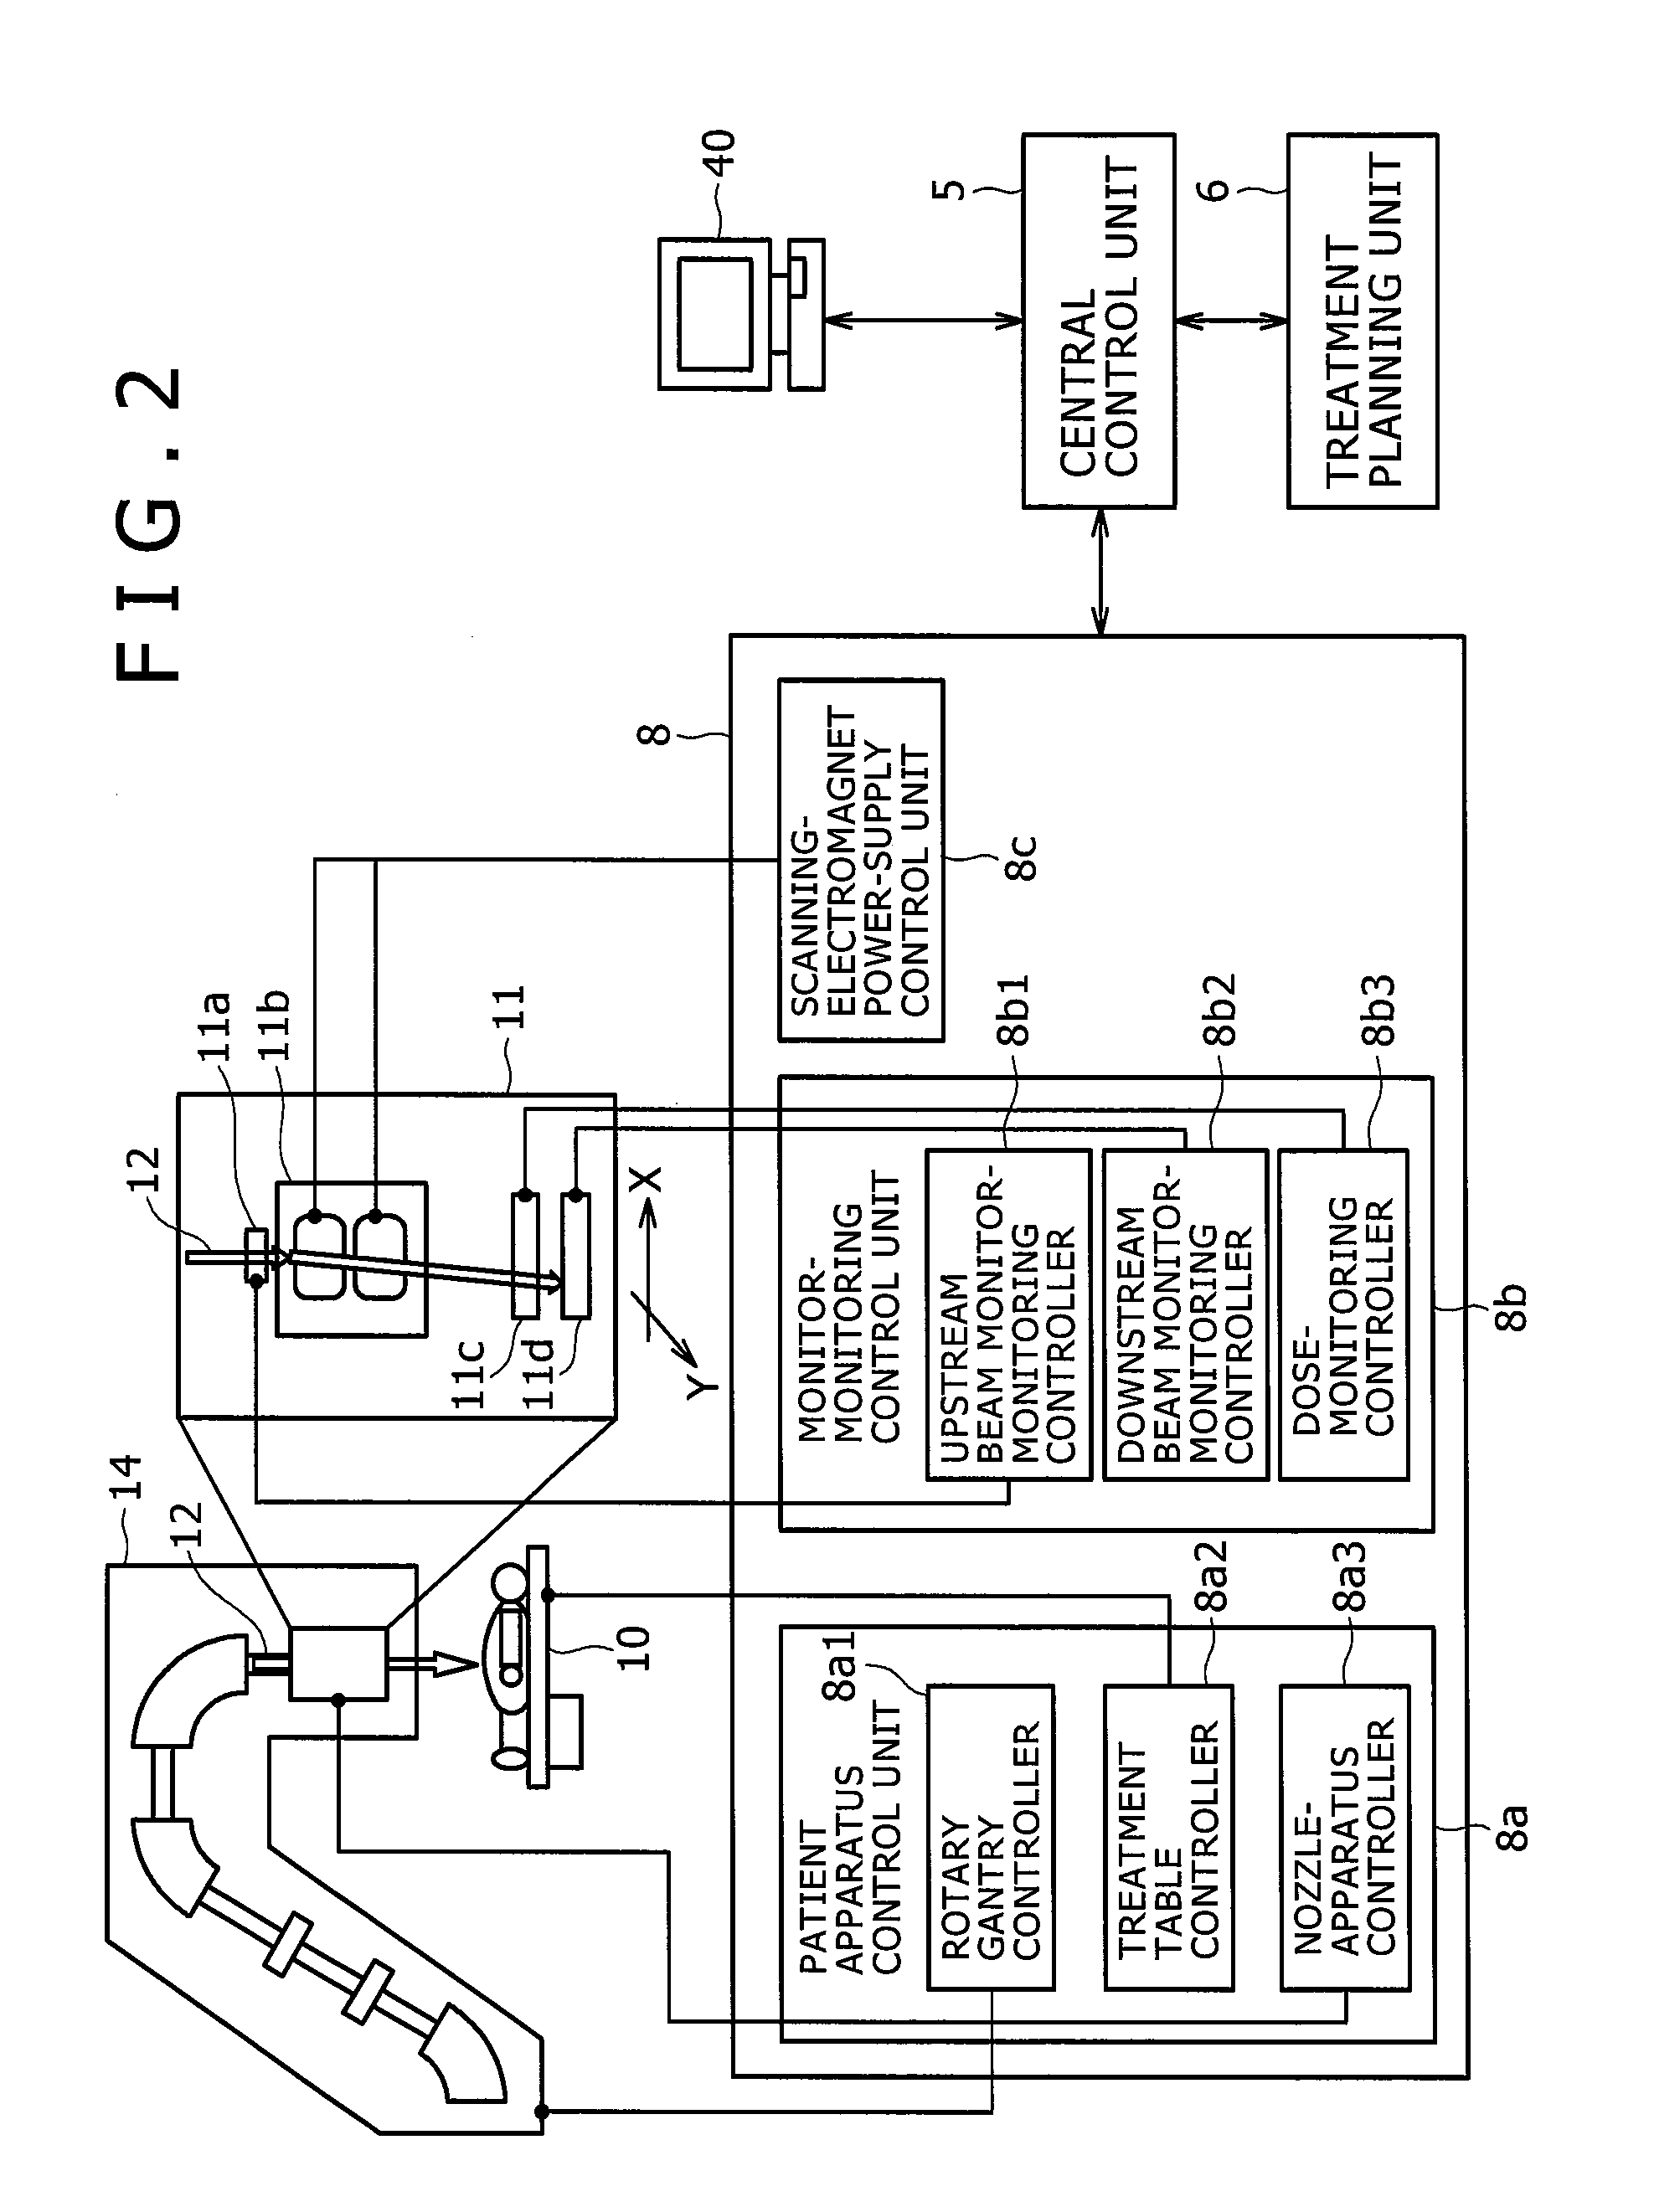 Beam monitor system and particle beam irradiation system